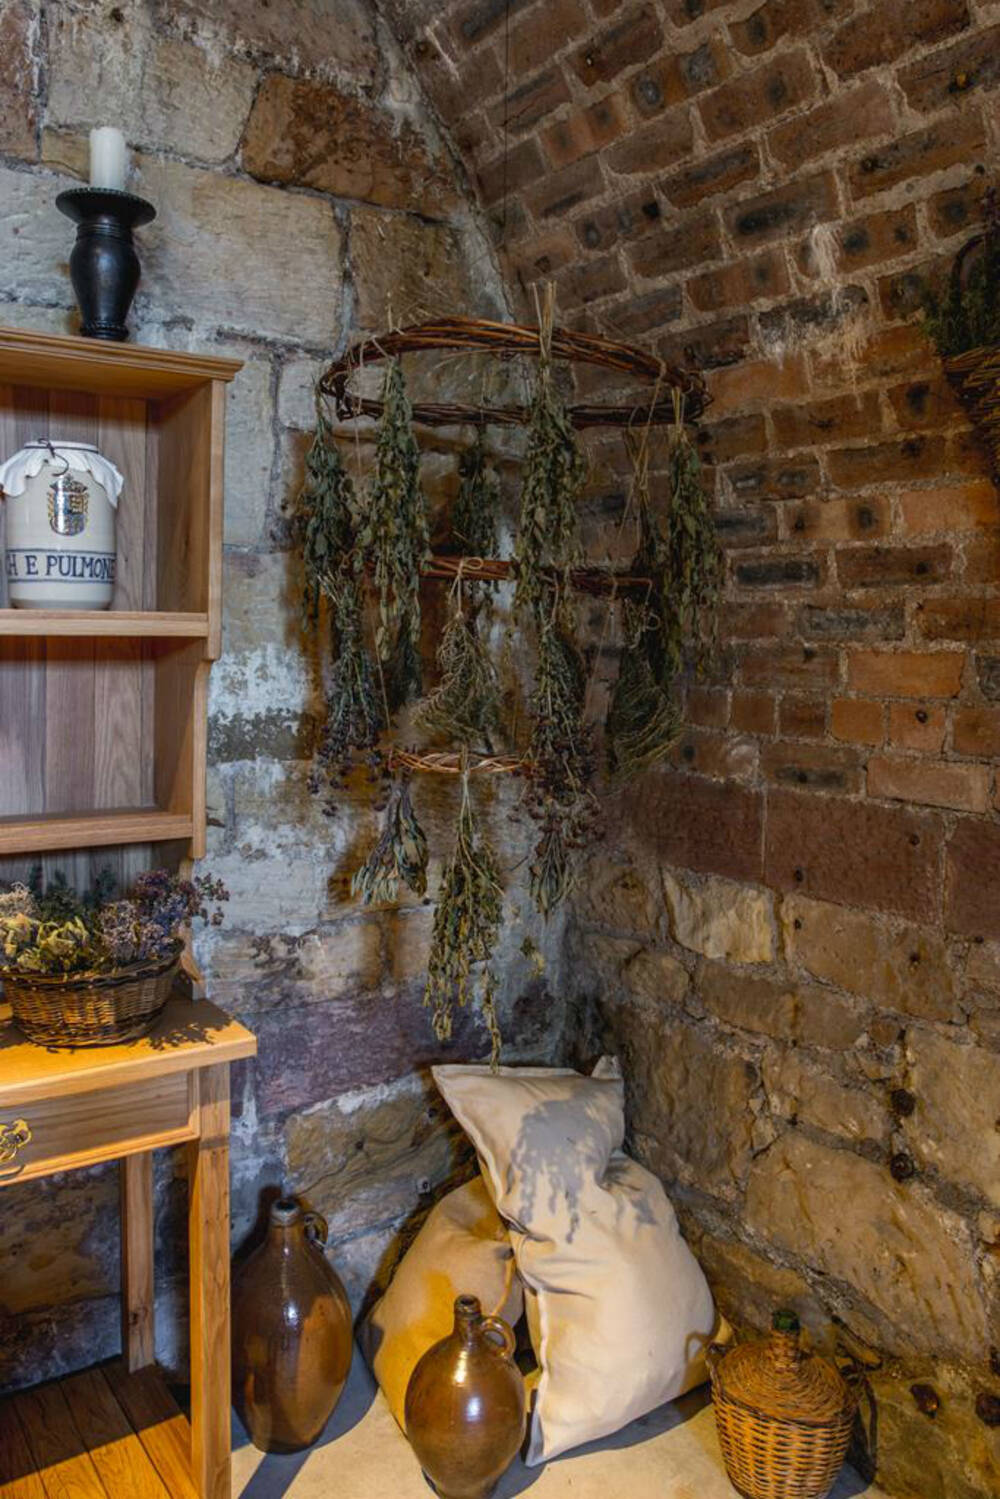 The apothecary has been filled with dried herbs in baskets and willow hangings